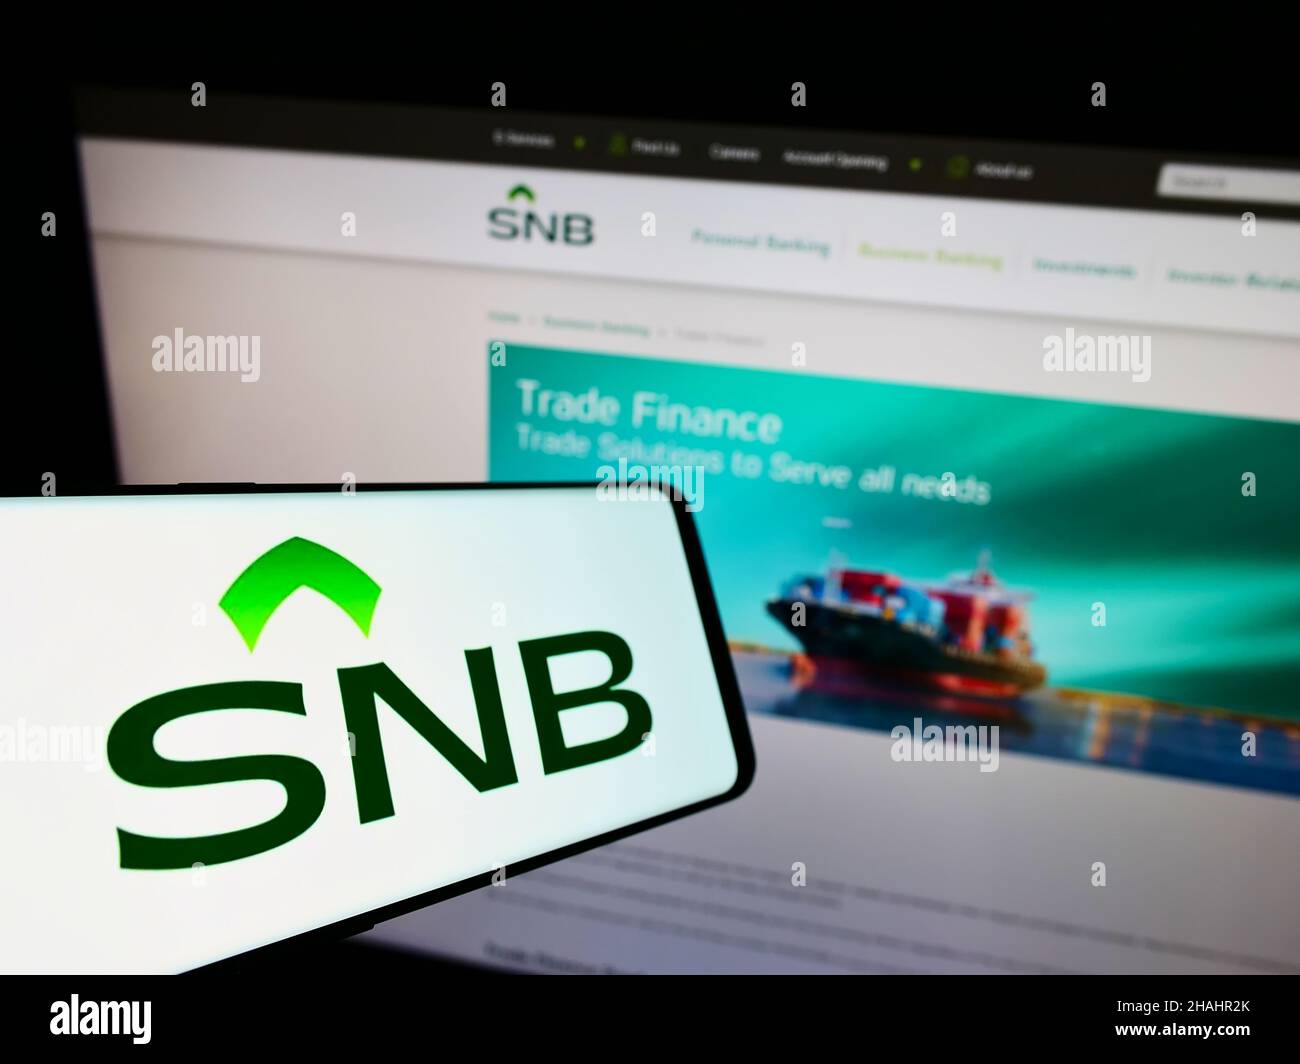 Cellphone with logo of financial company Saudi National Bank (SNB) on screen in front of business website. Focus on center-left of phone display. Stock Photo